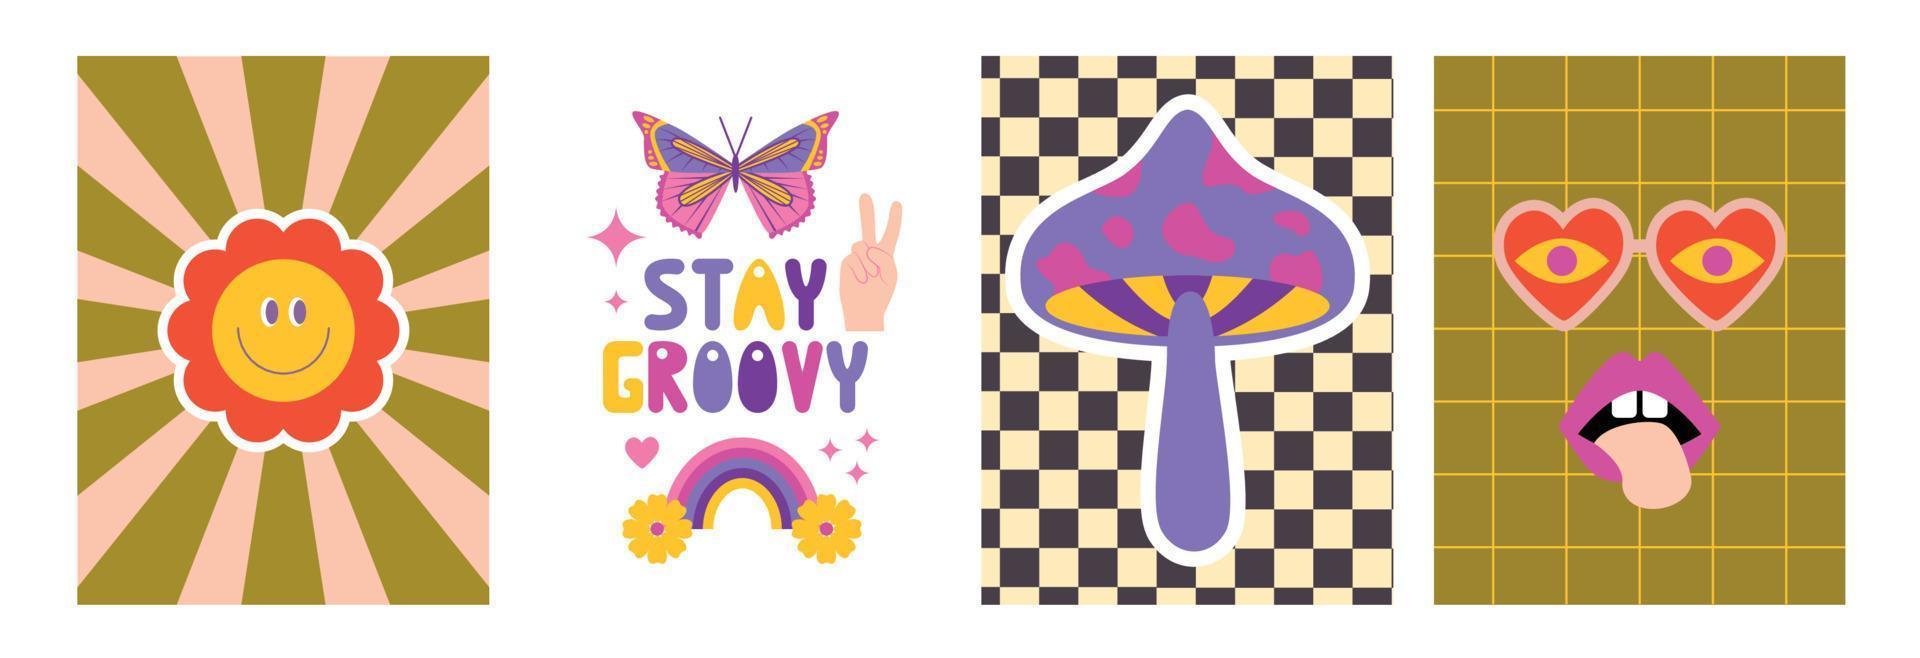 Set of Retro 70s Groovy Hippie posters. Retro vibes. Stay groovy. Groovy daisy flowers, rainbows, mushrooms, hippie bus, butterfly, sunglasses. Wall art prints. vector